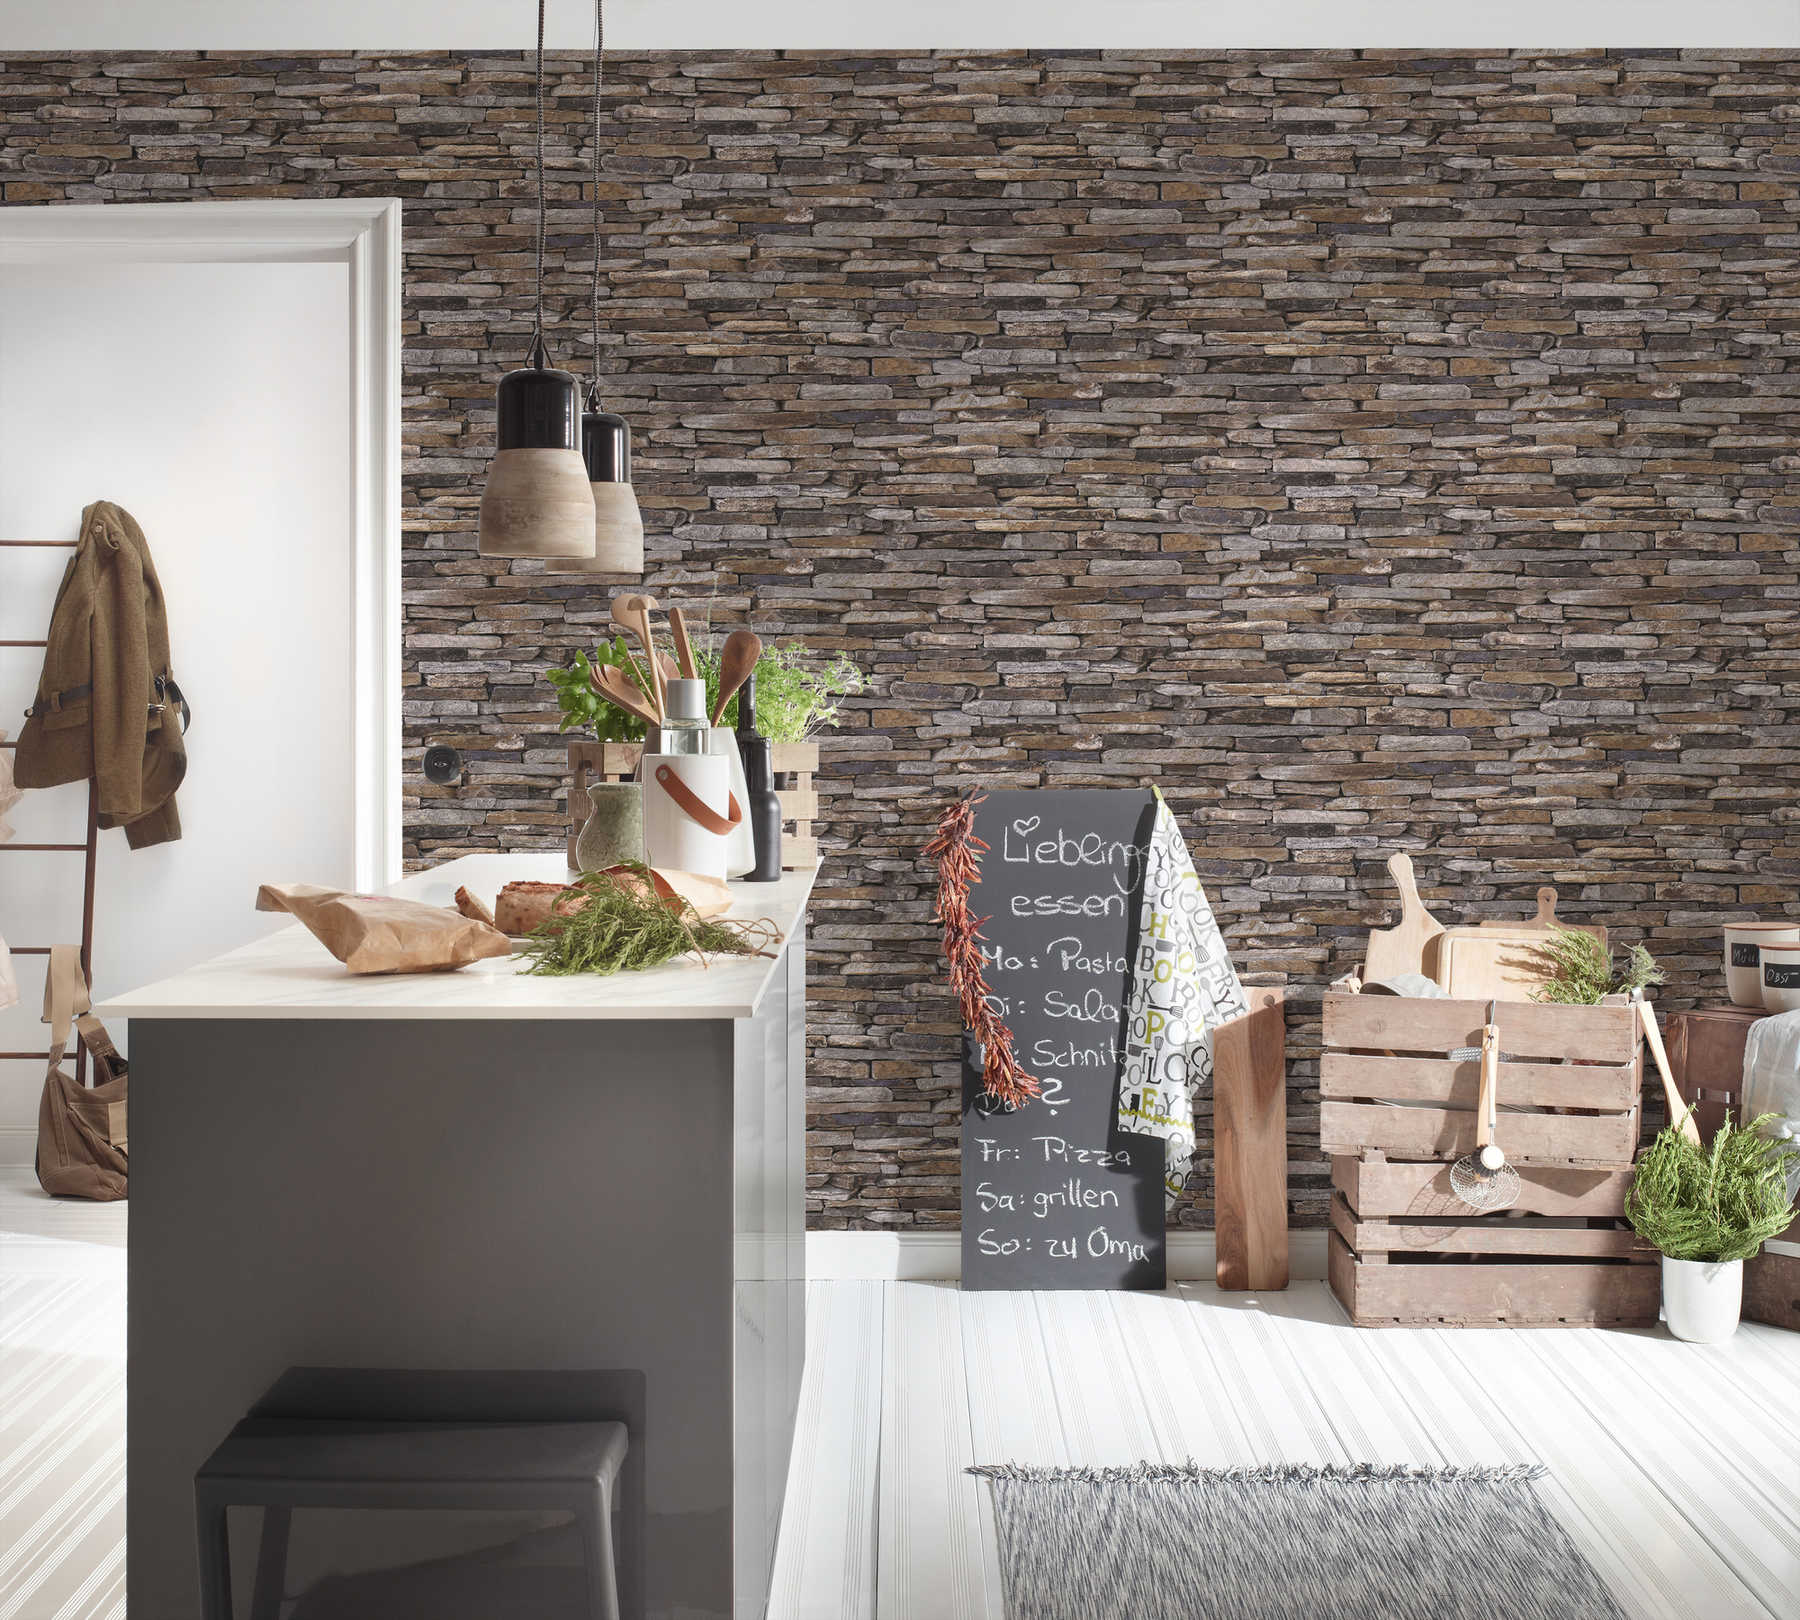             Stone wallpaper with dry stone wall & realistic natural stone - brown, beige, yellow
        